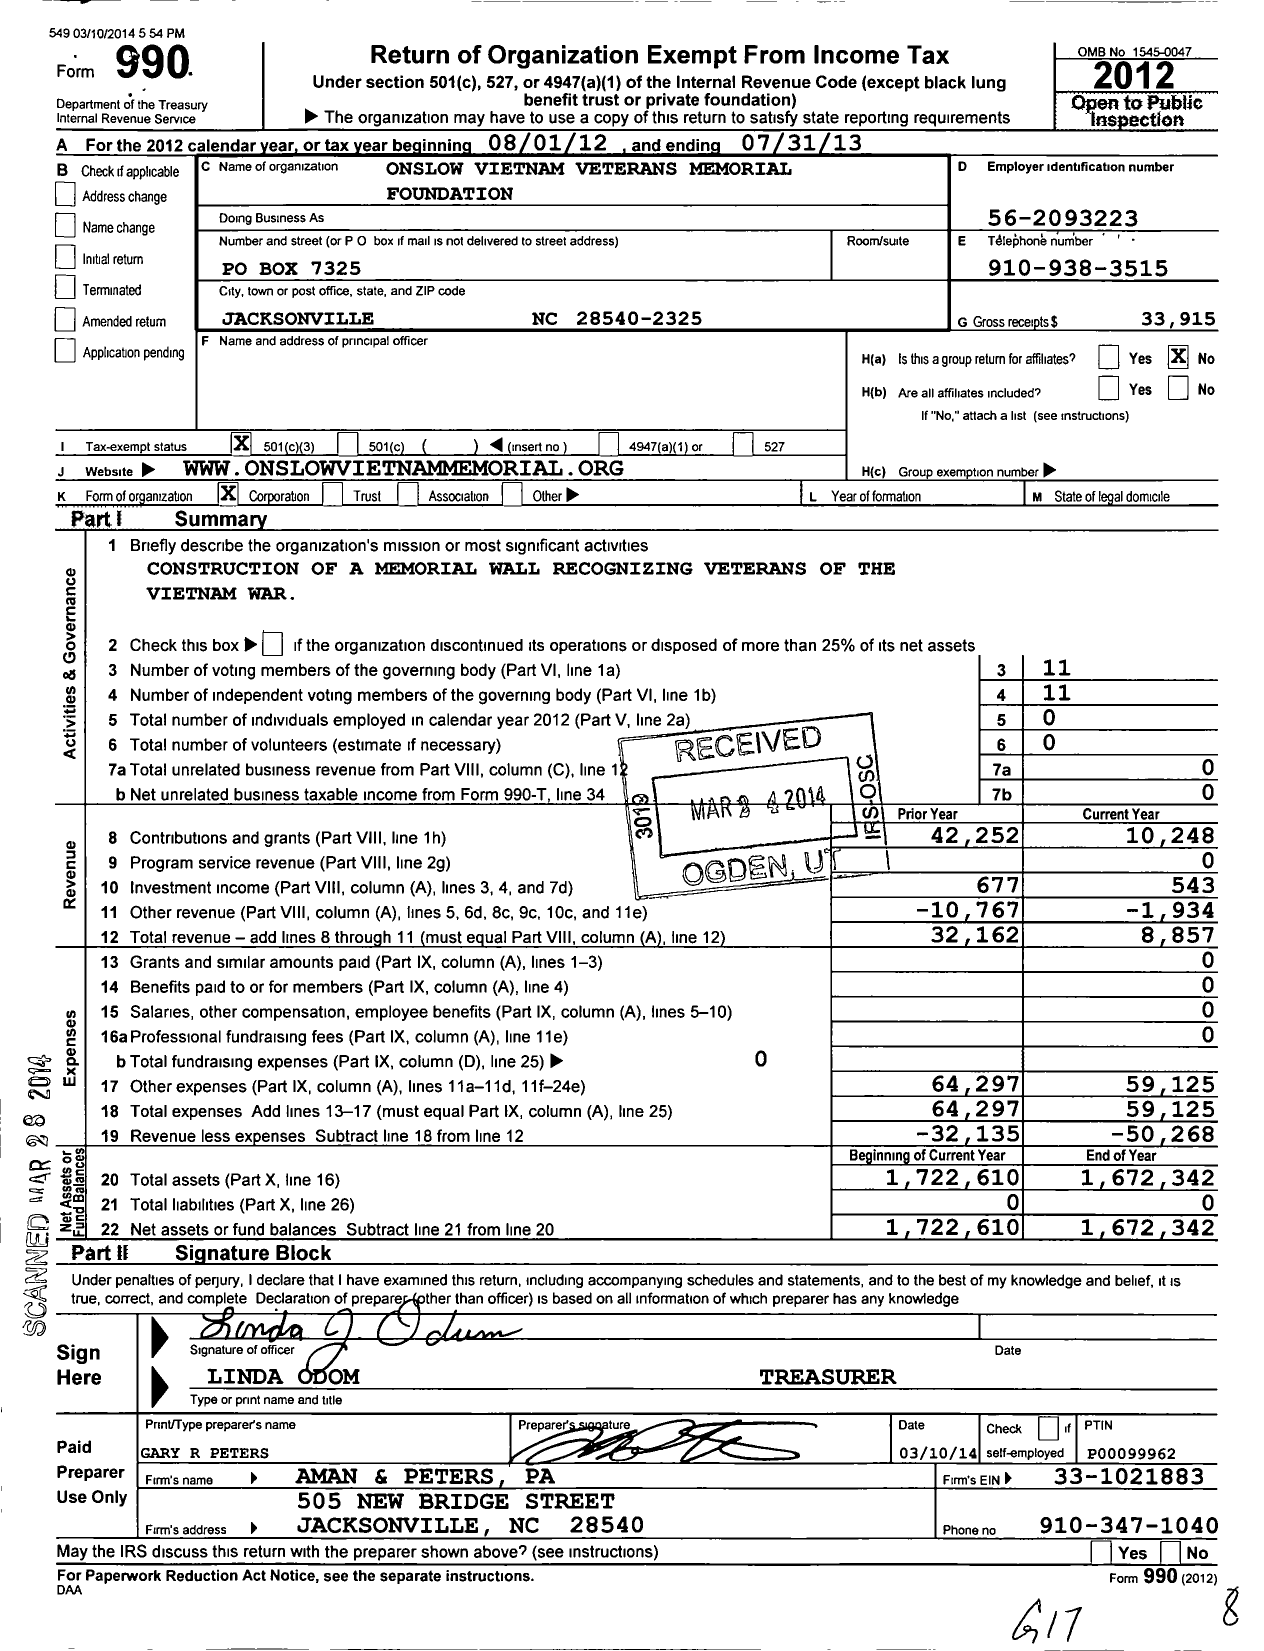 Image of first page of 2012 Form 990 for Onslow Vietnam Veterans Memorial Foundation